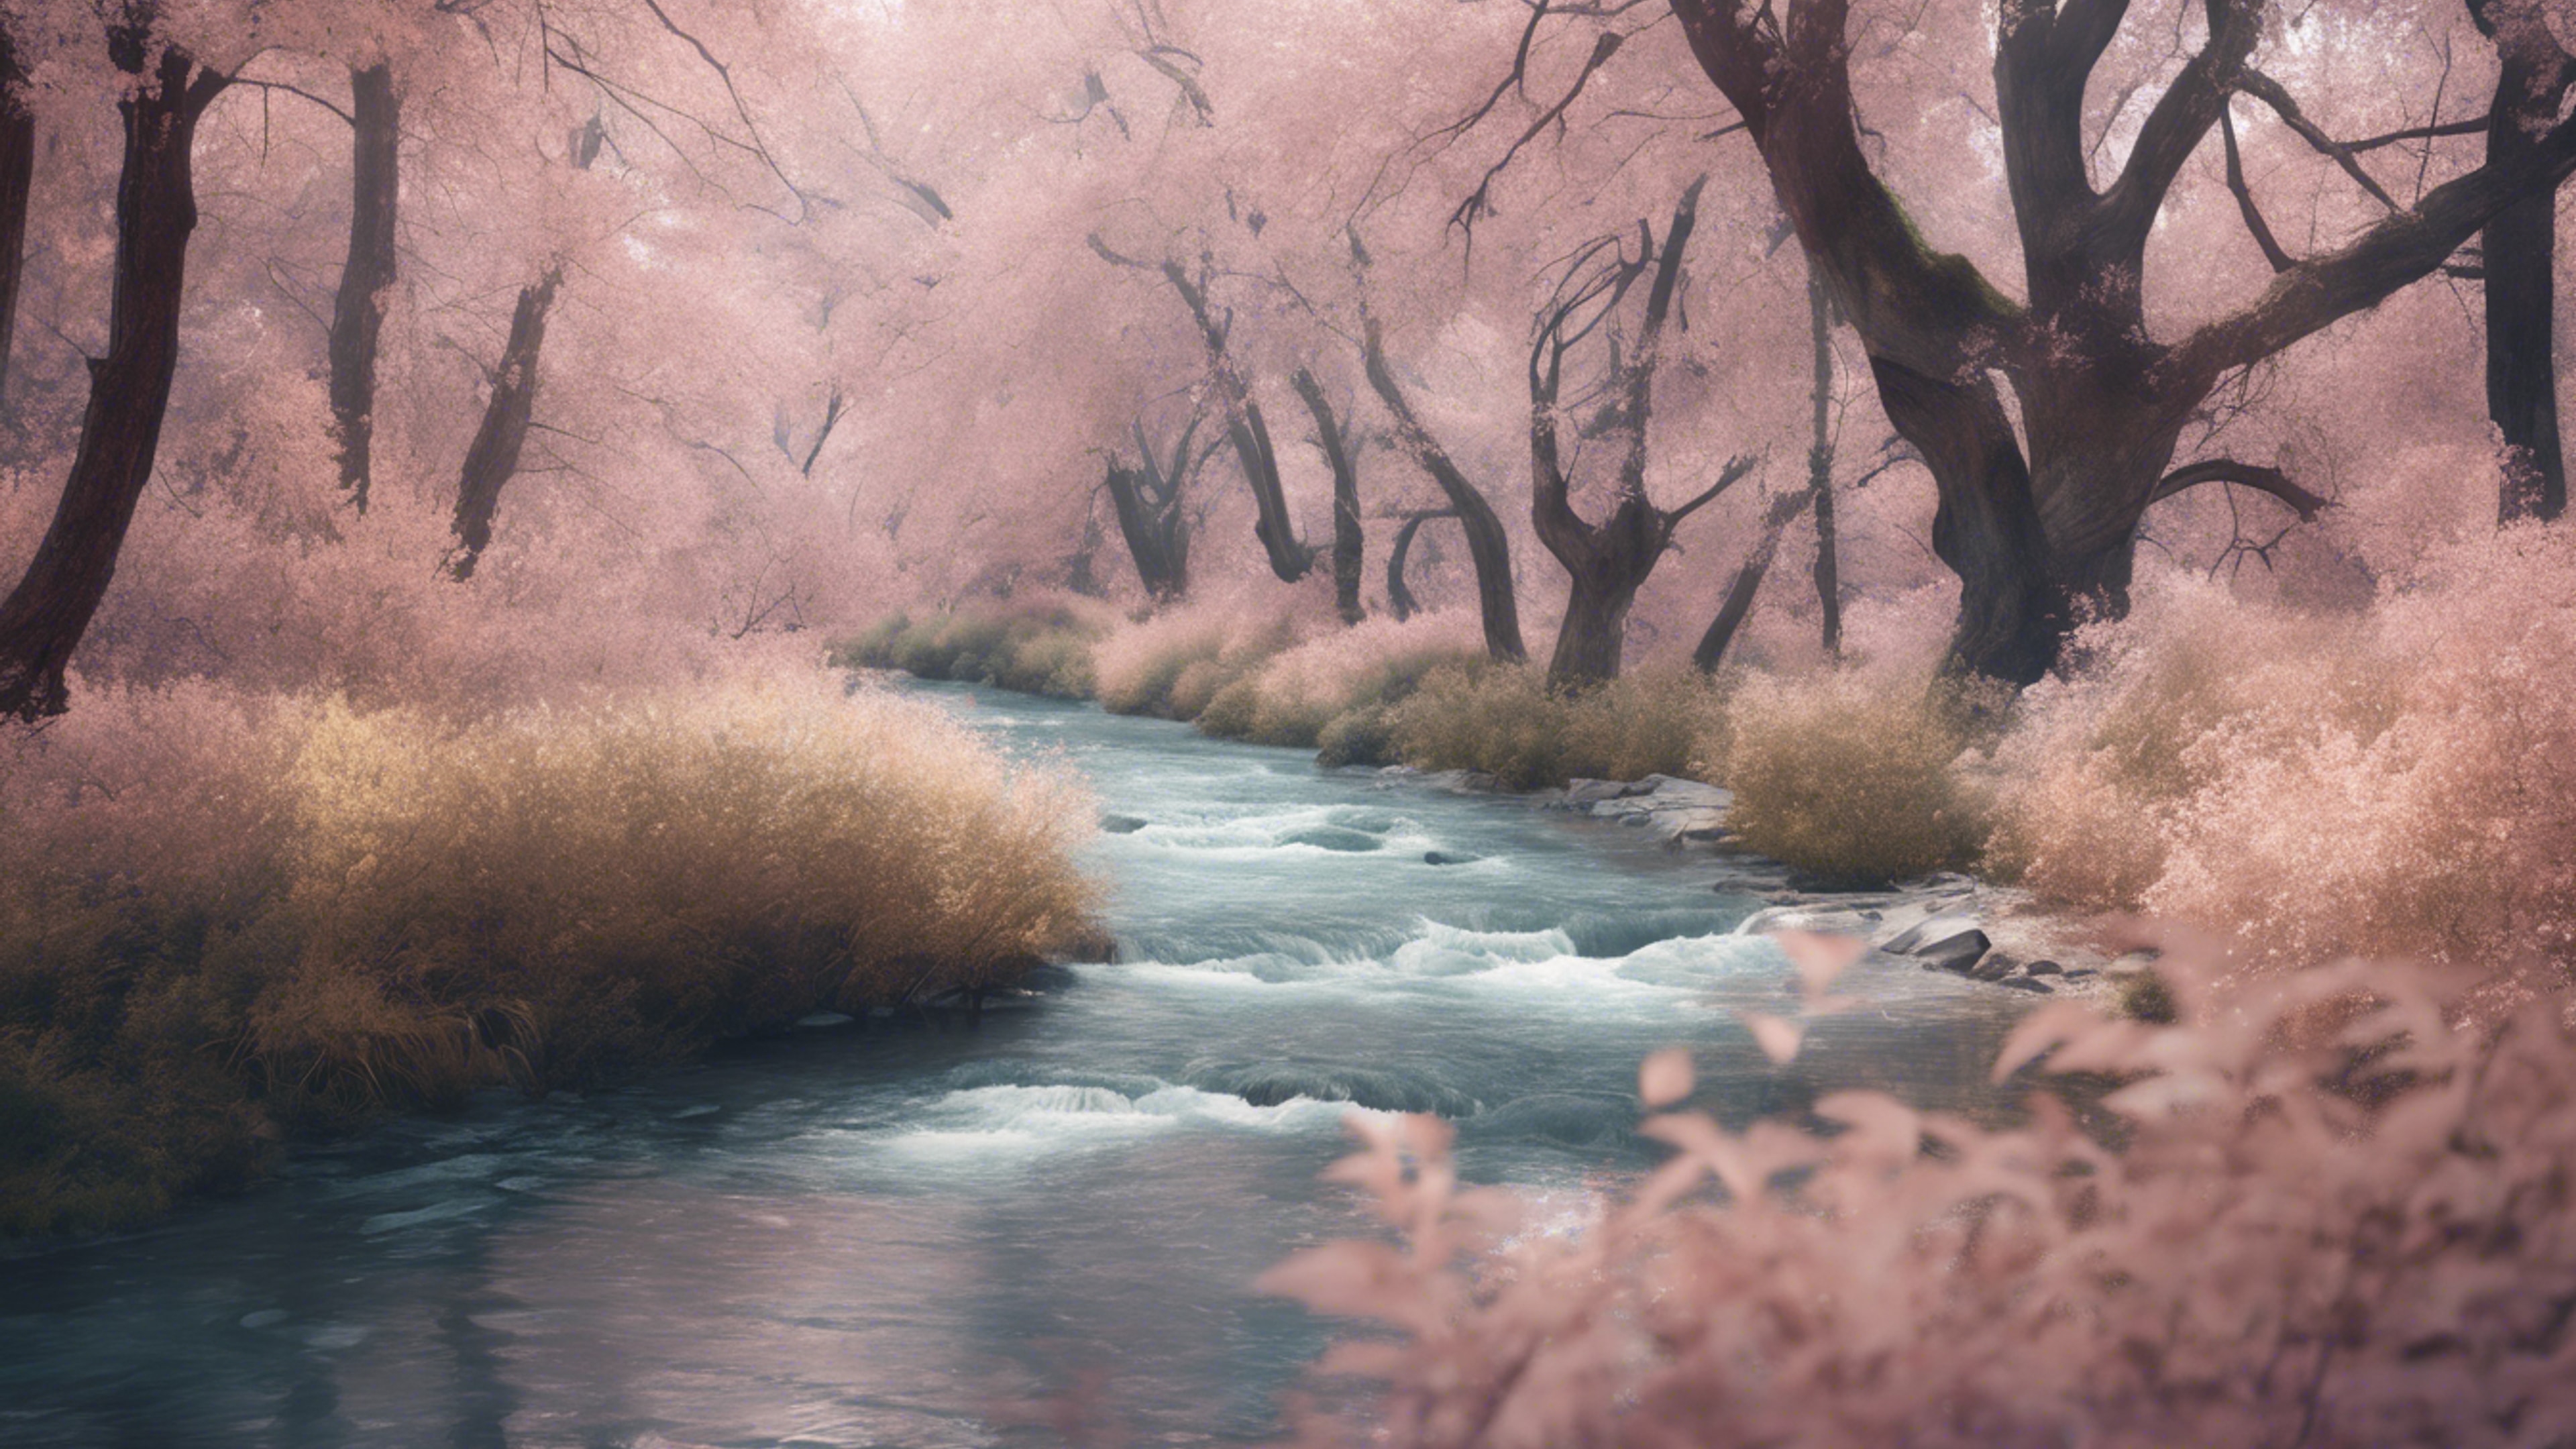 An illustration of a murmuring creek, surrounded by trees bearing cool pastel leaves.壁紙[1b082a297a56458ebf1b]